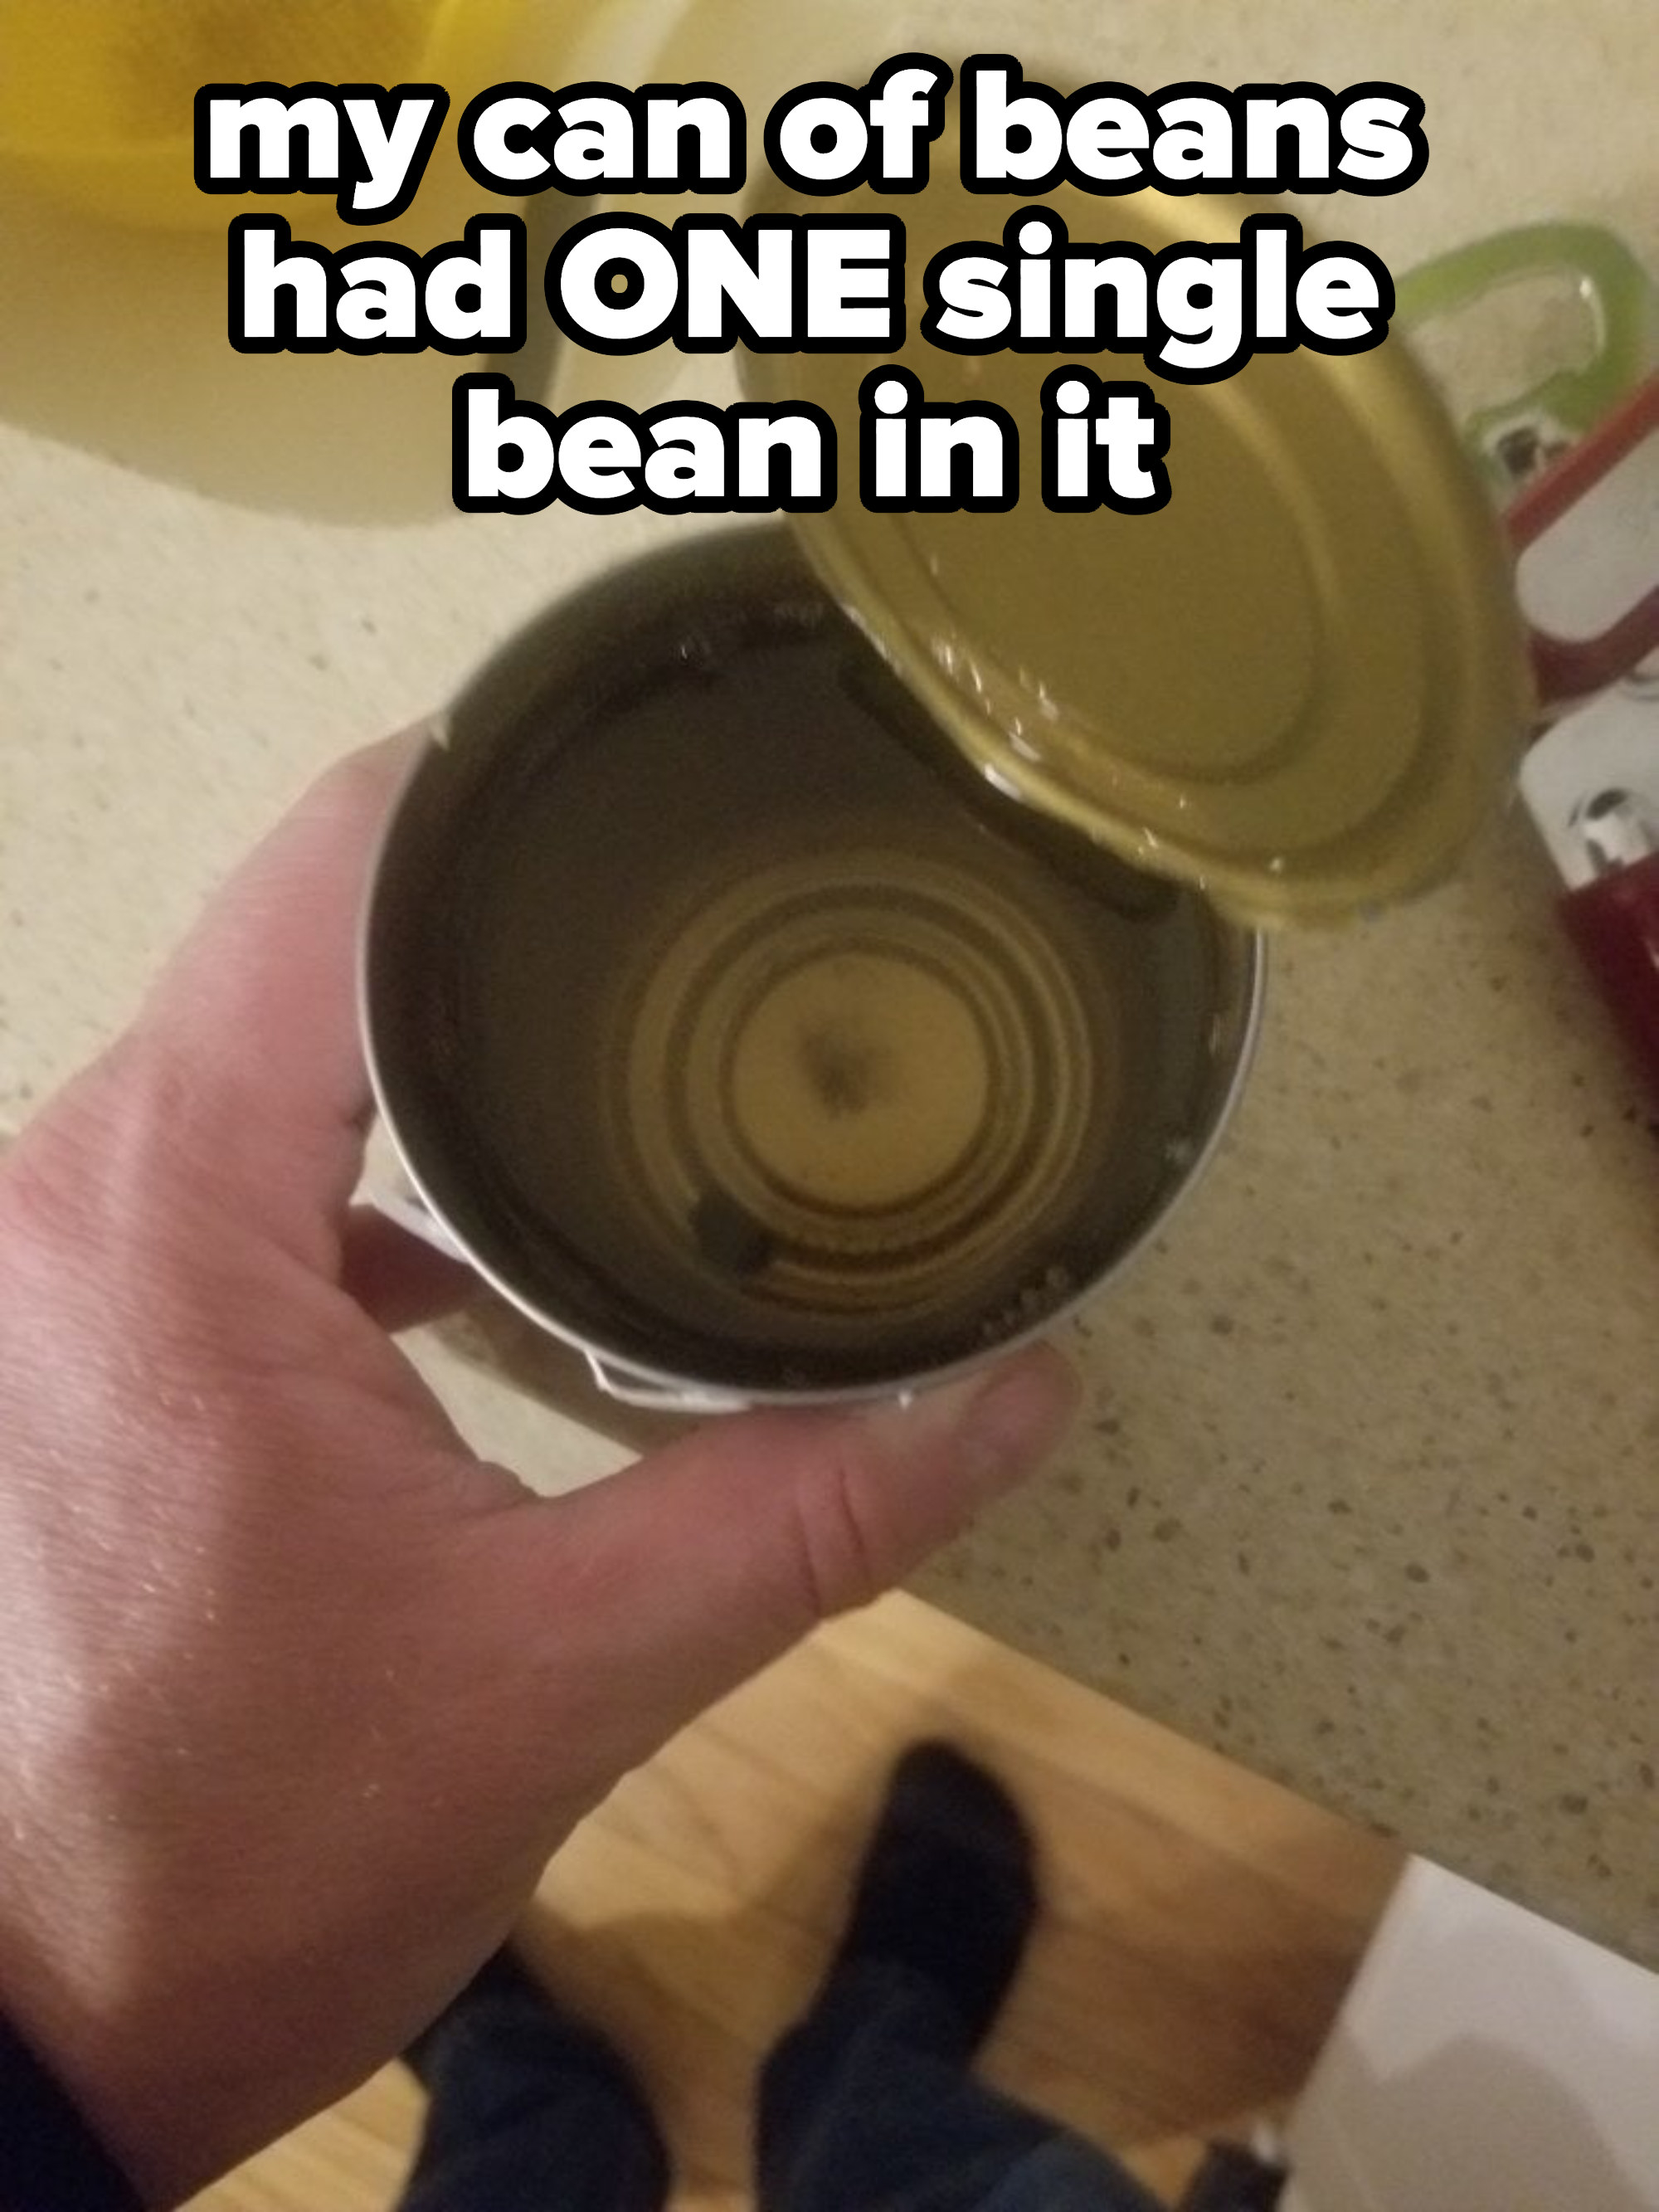 A can with one bean